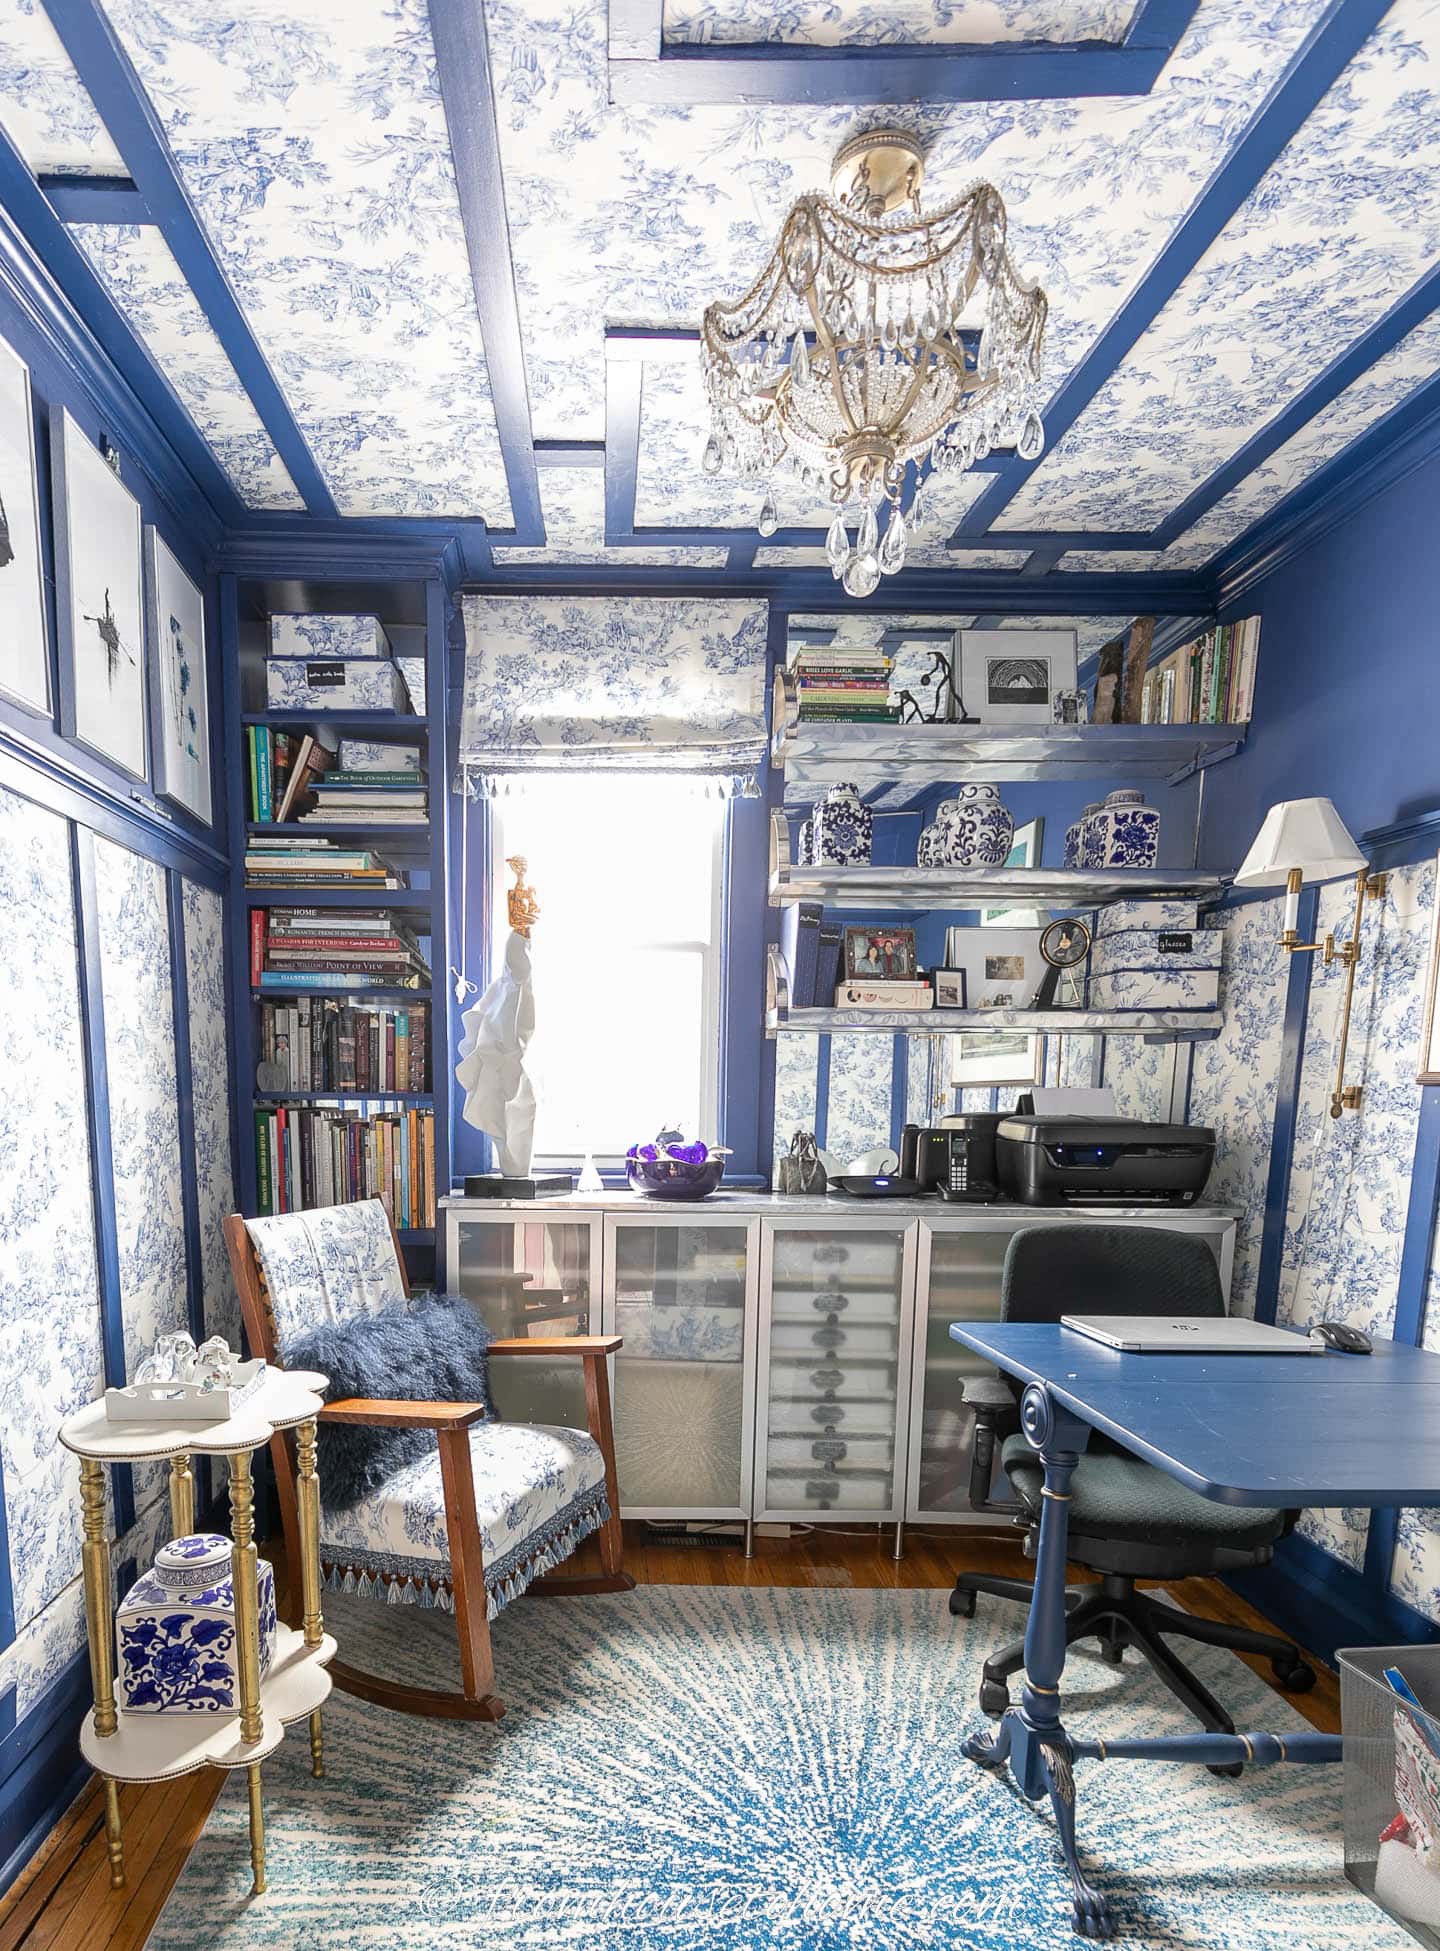 The home office "after" - with a chandelier and blue and white toile on the ceiling and walls